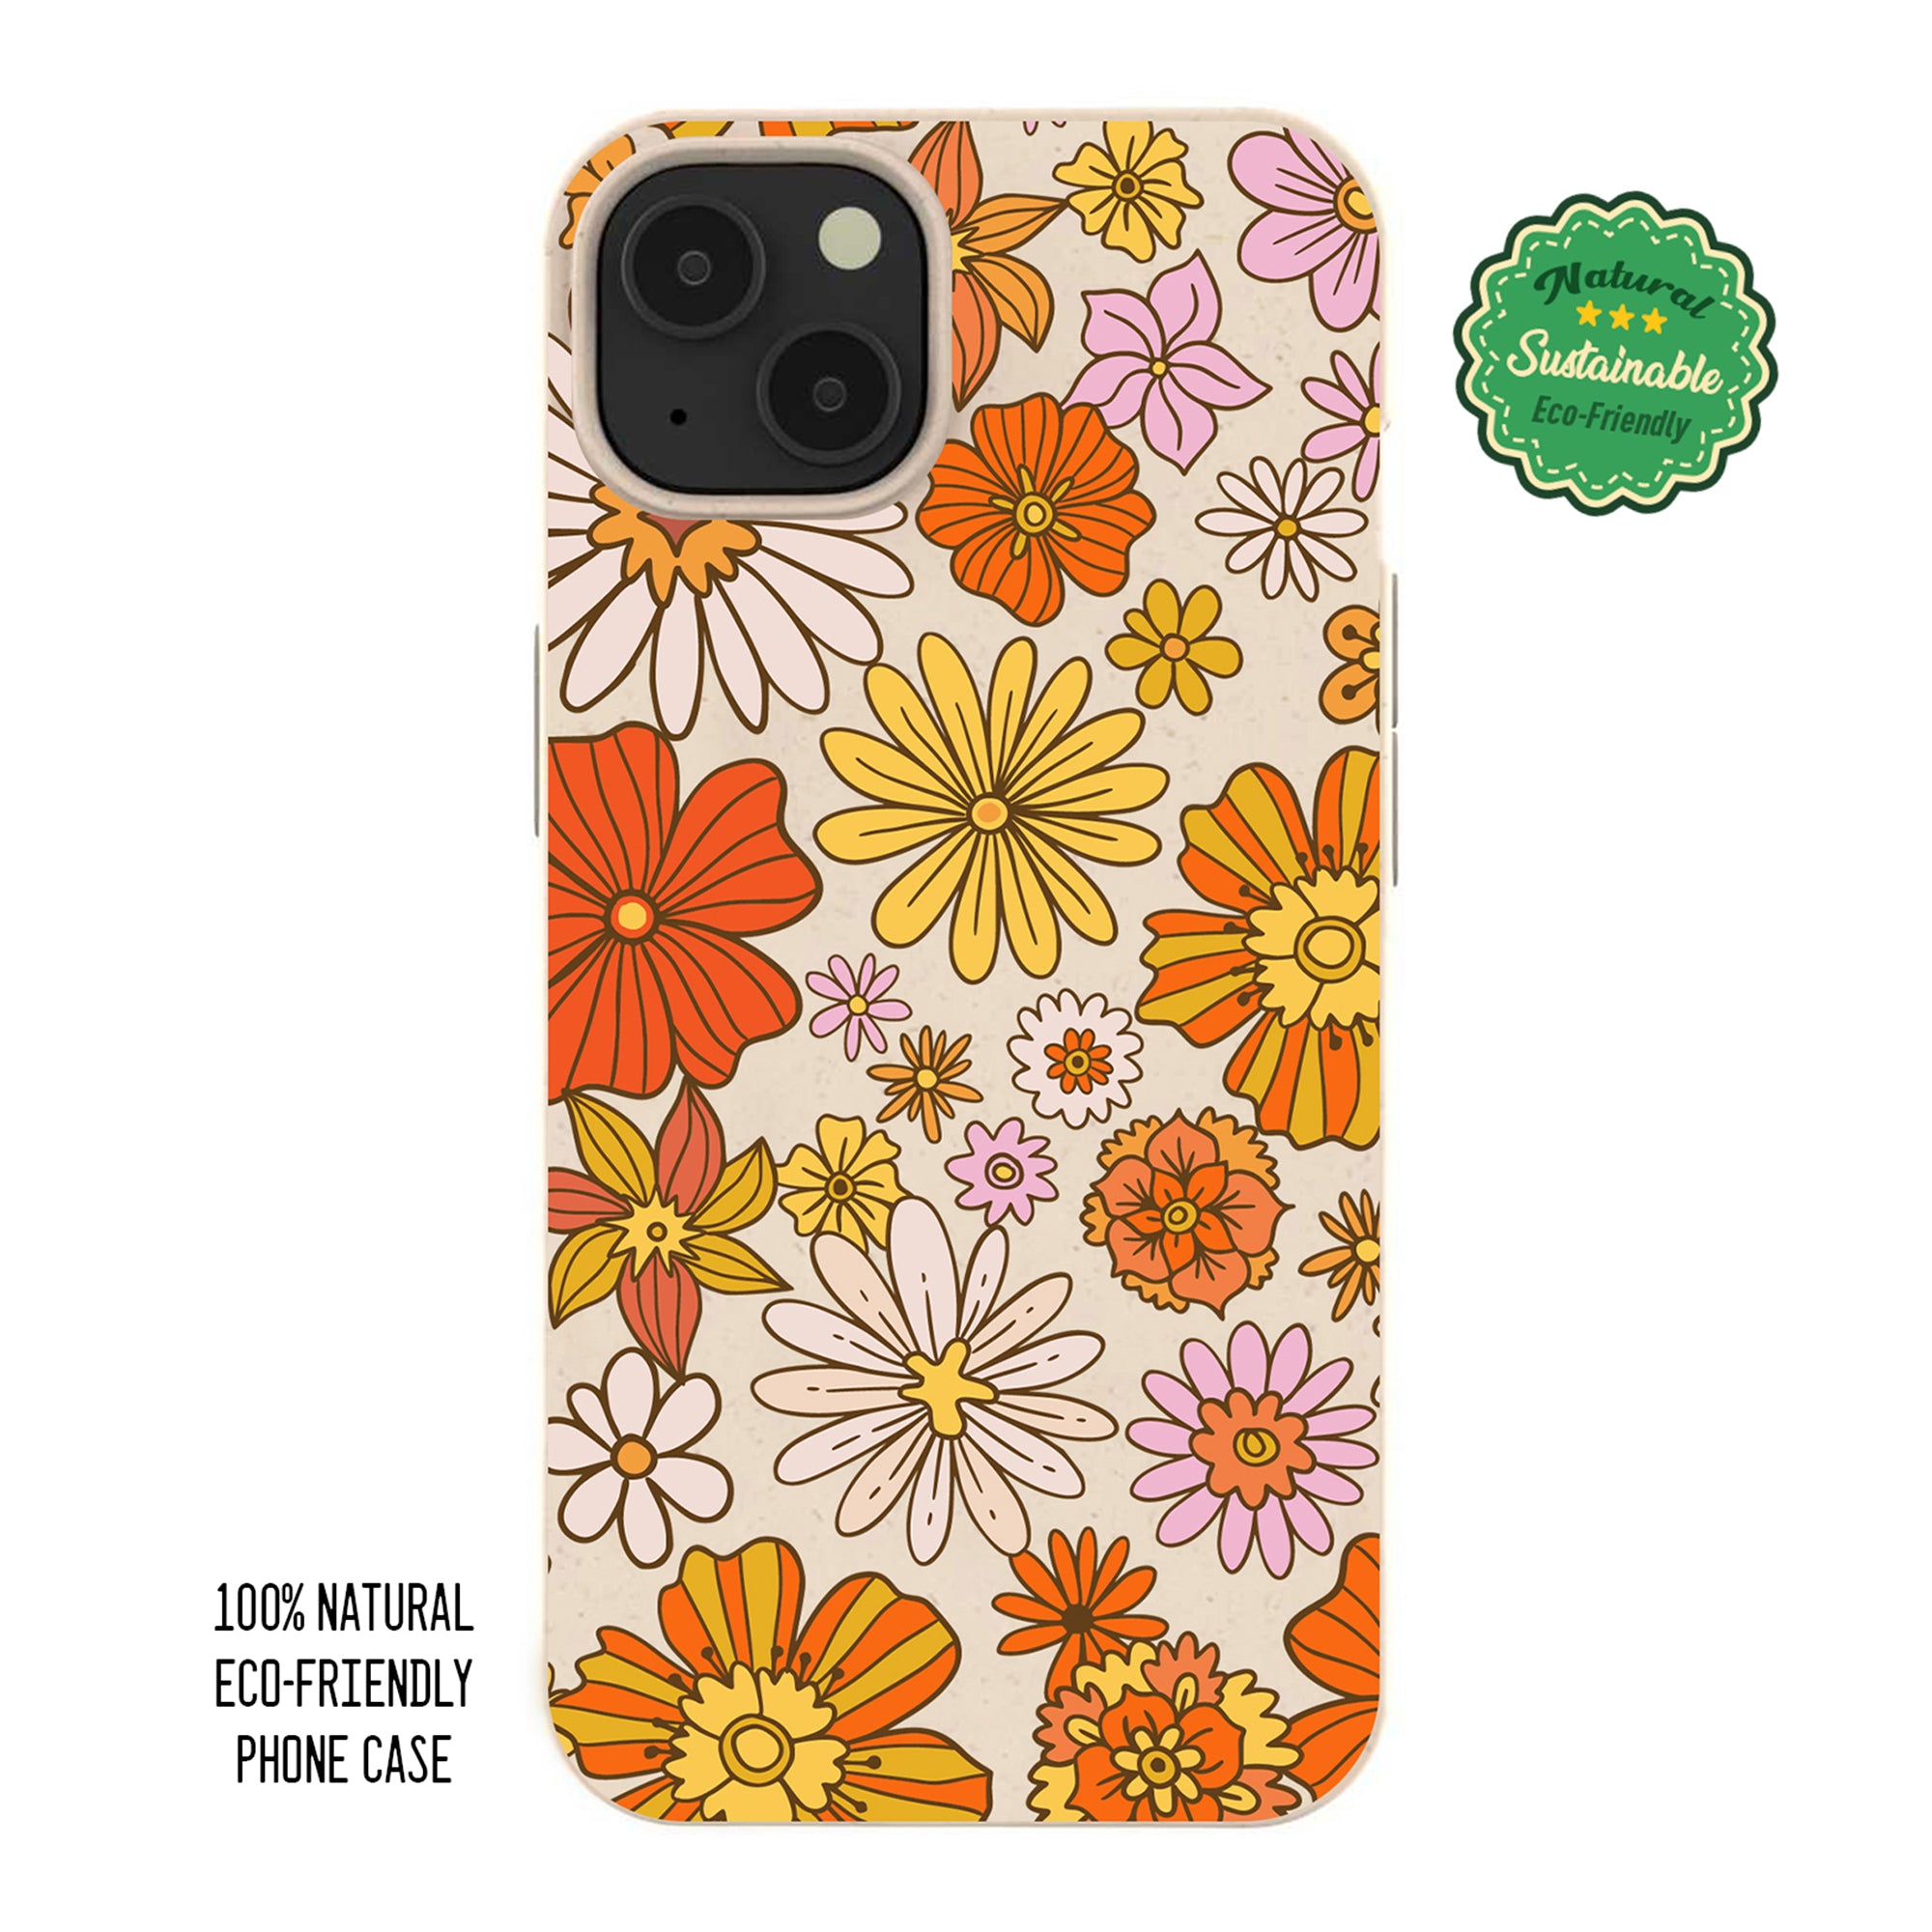 Sustainable iPhone Cases & Covers